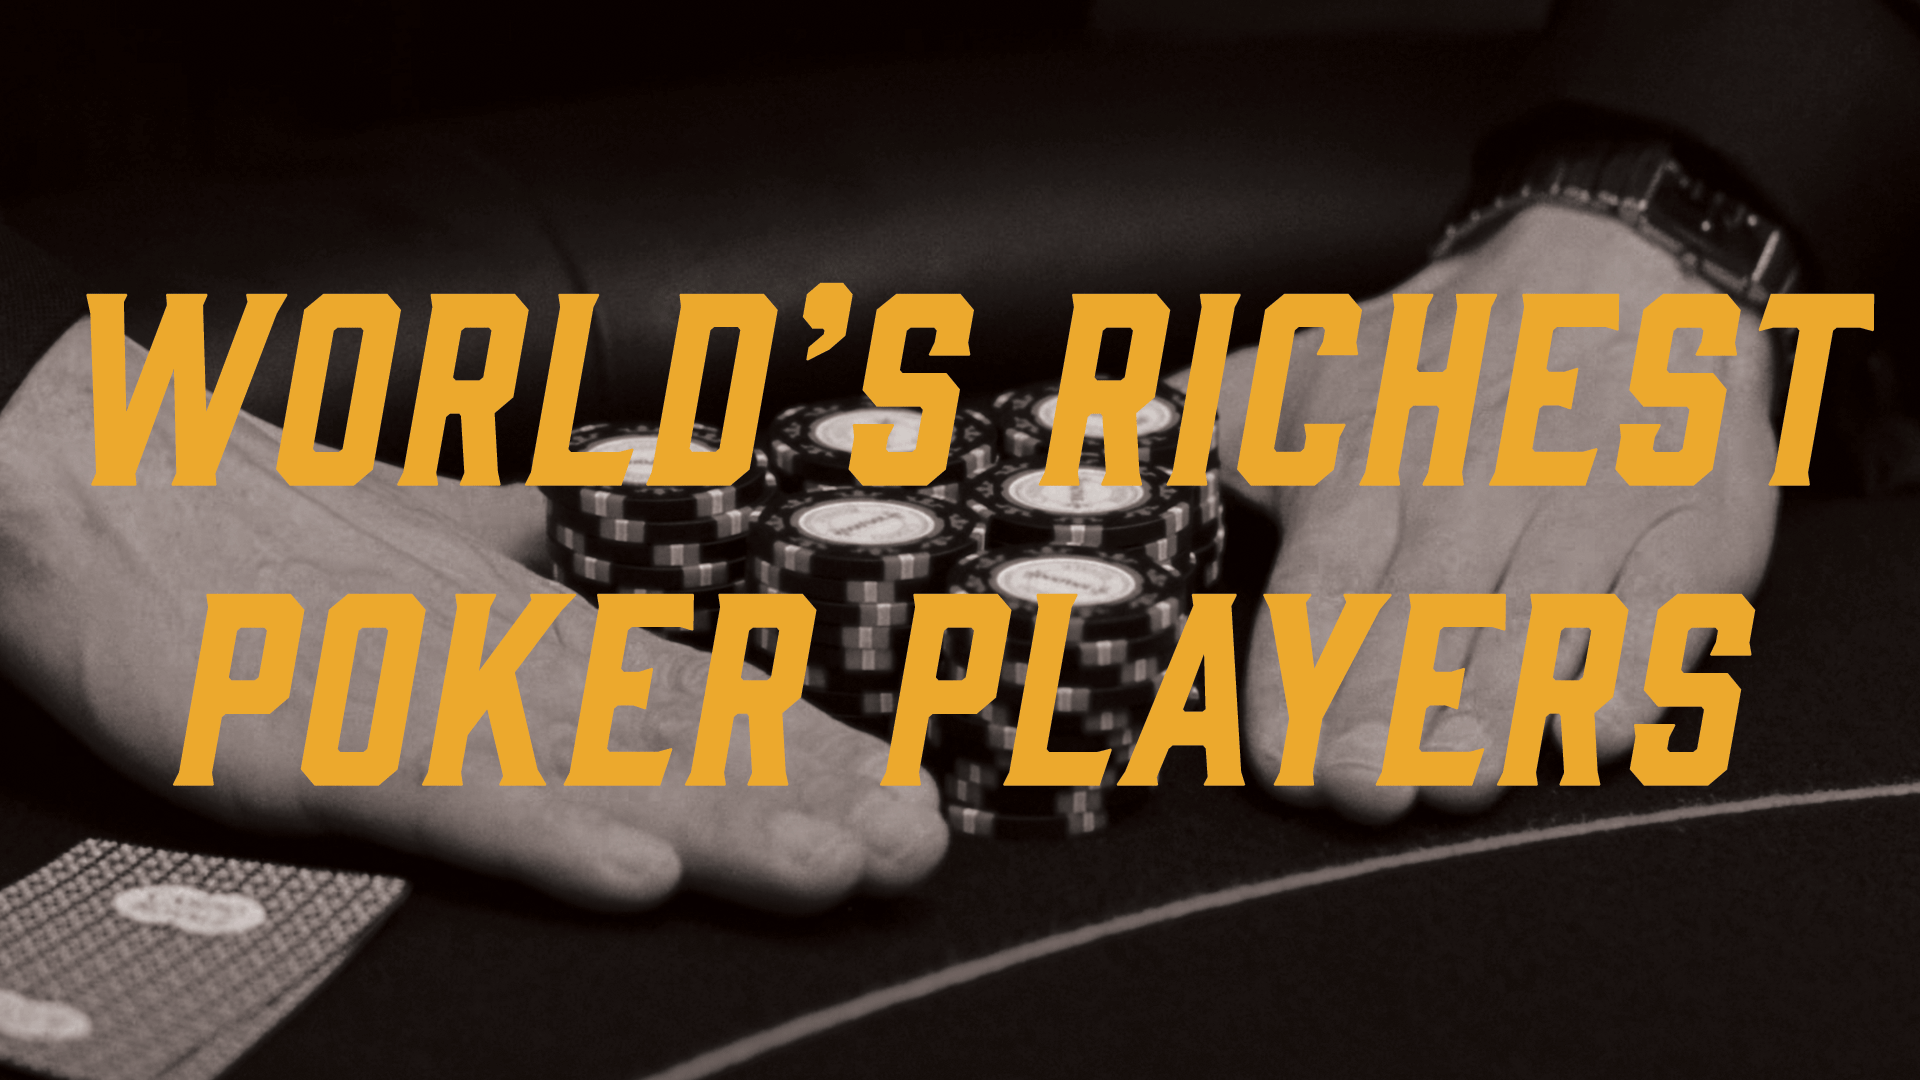 Ranking the World’s Richest Poker Players